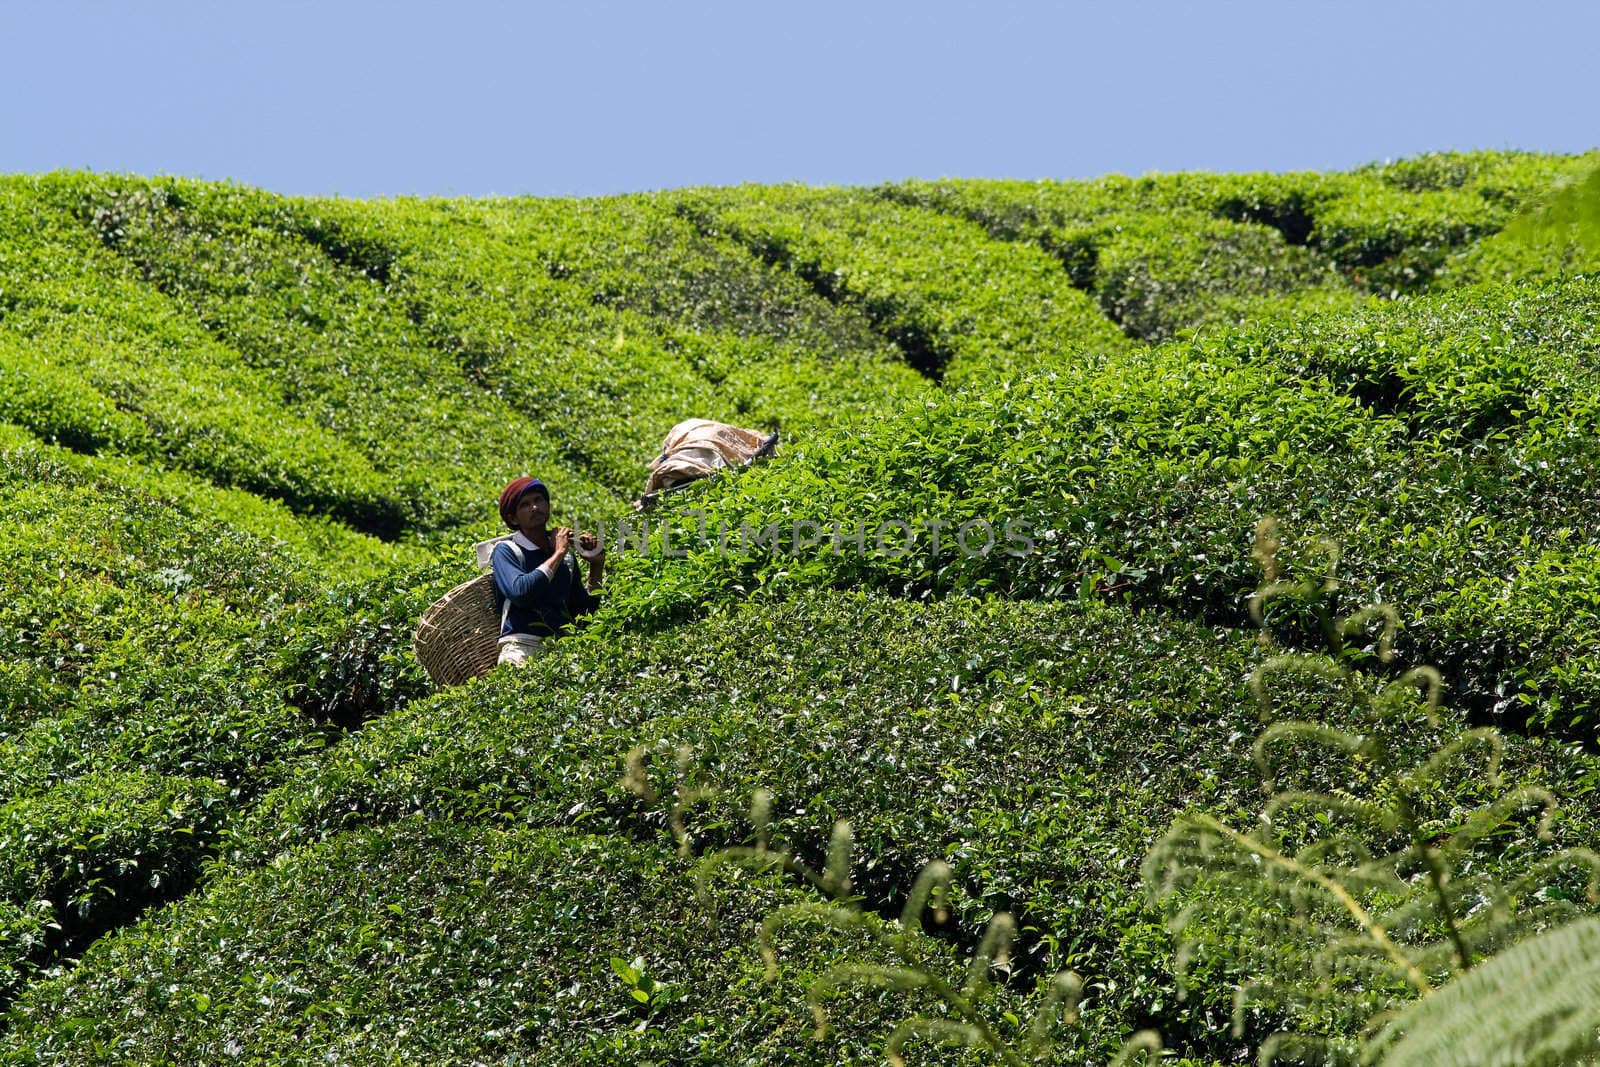 Workers harvesting tea in Cameron Highlands by ints